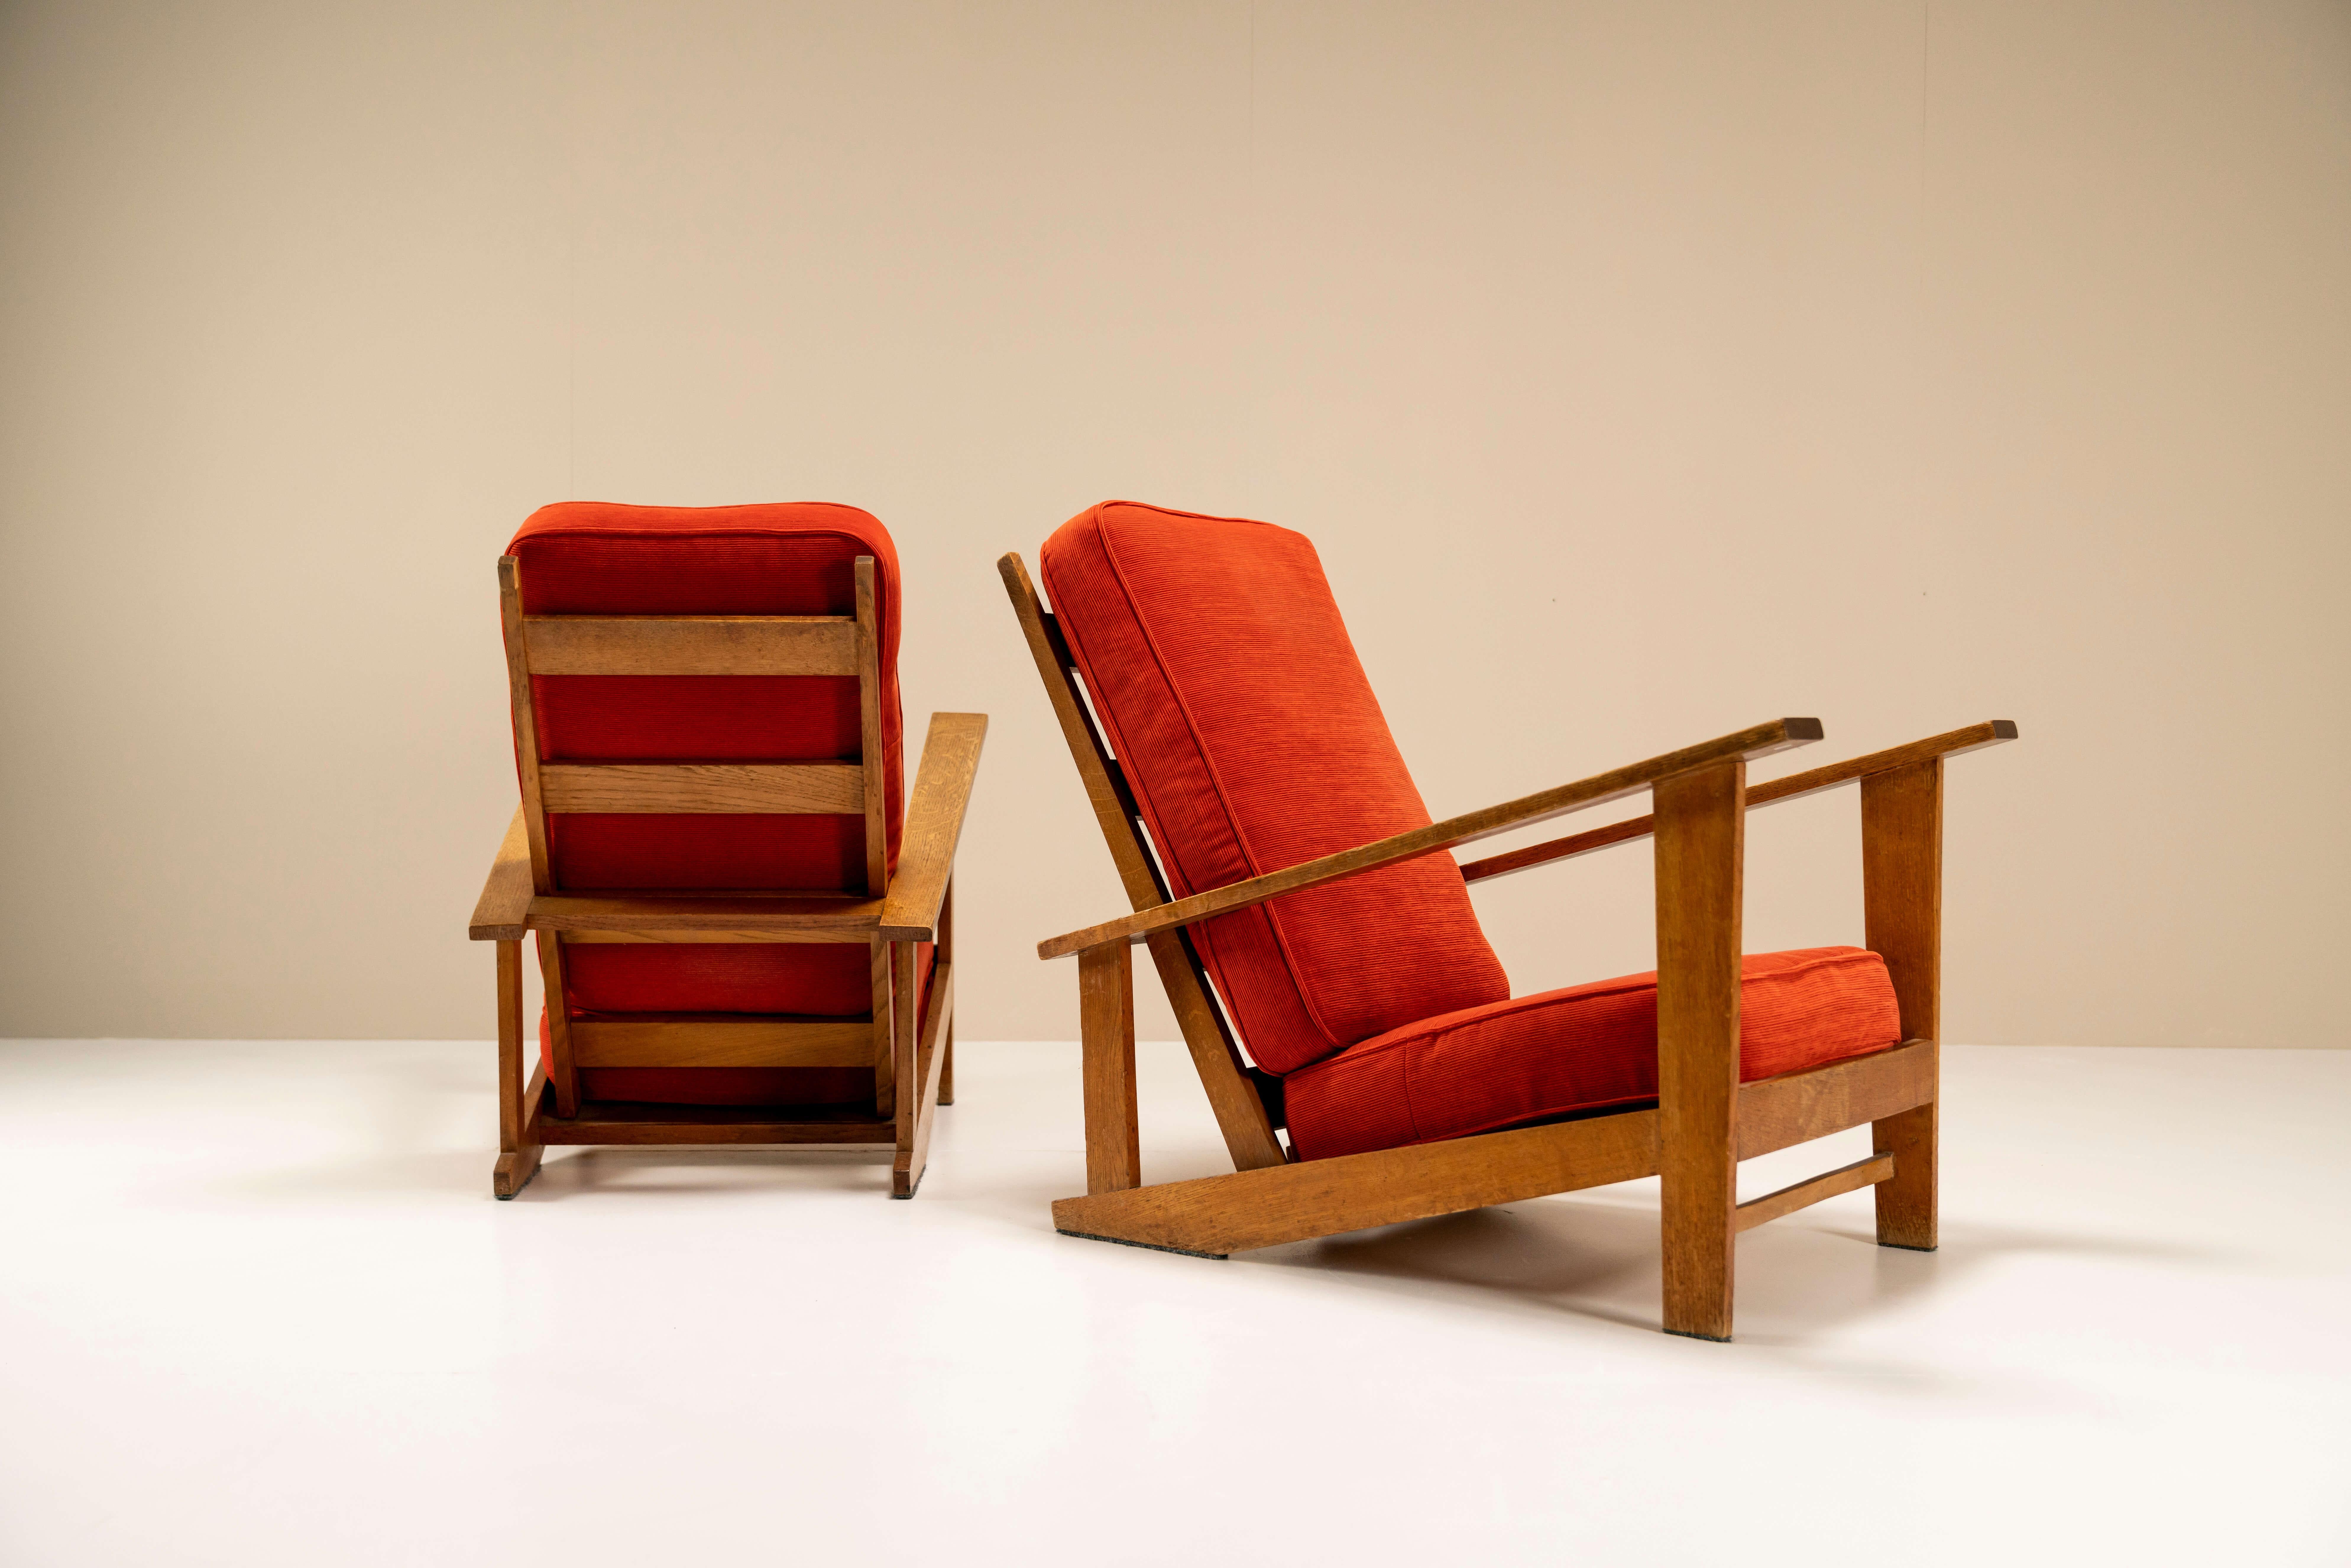 The design of these lounge chairs is very distinct and seduces us to look beyond that at first glance. The story goes that these chairs were made to order by Gerard van de Groenekan. When we look in detail at the way the composition of the frame